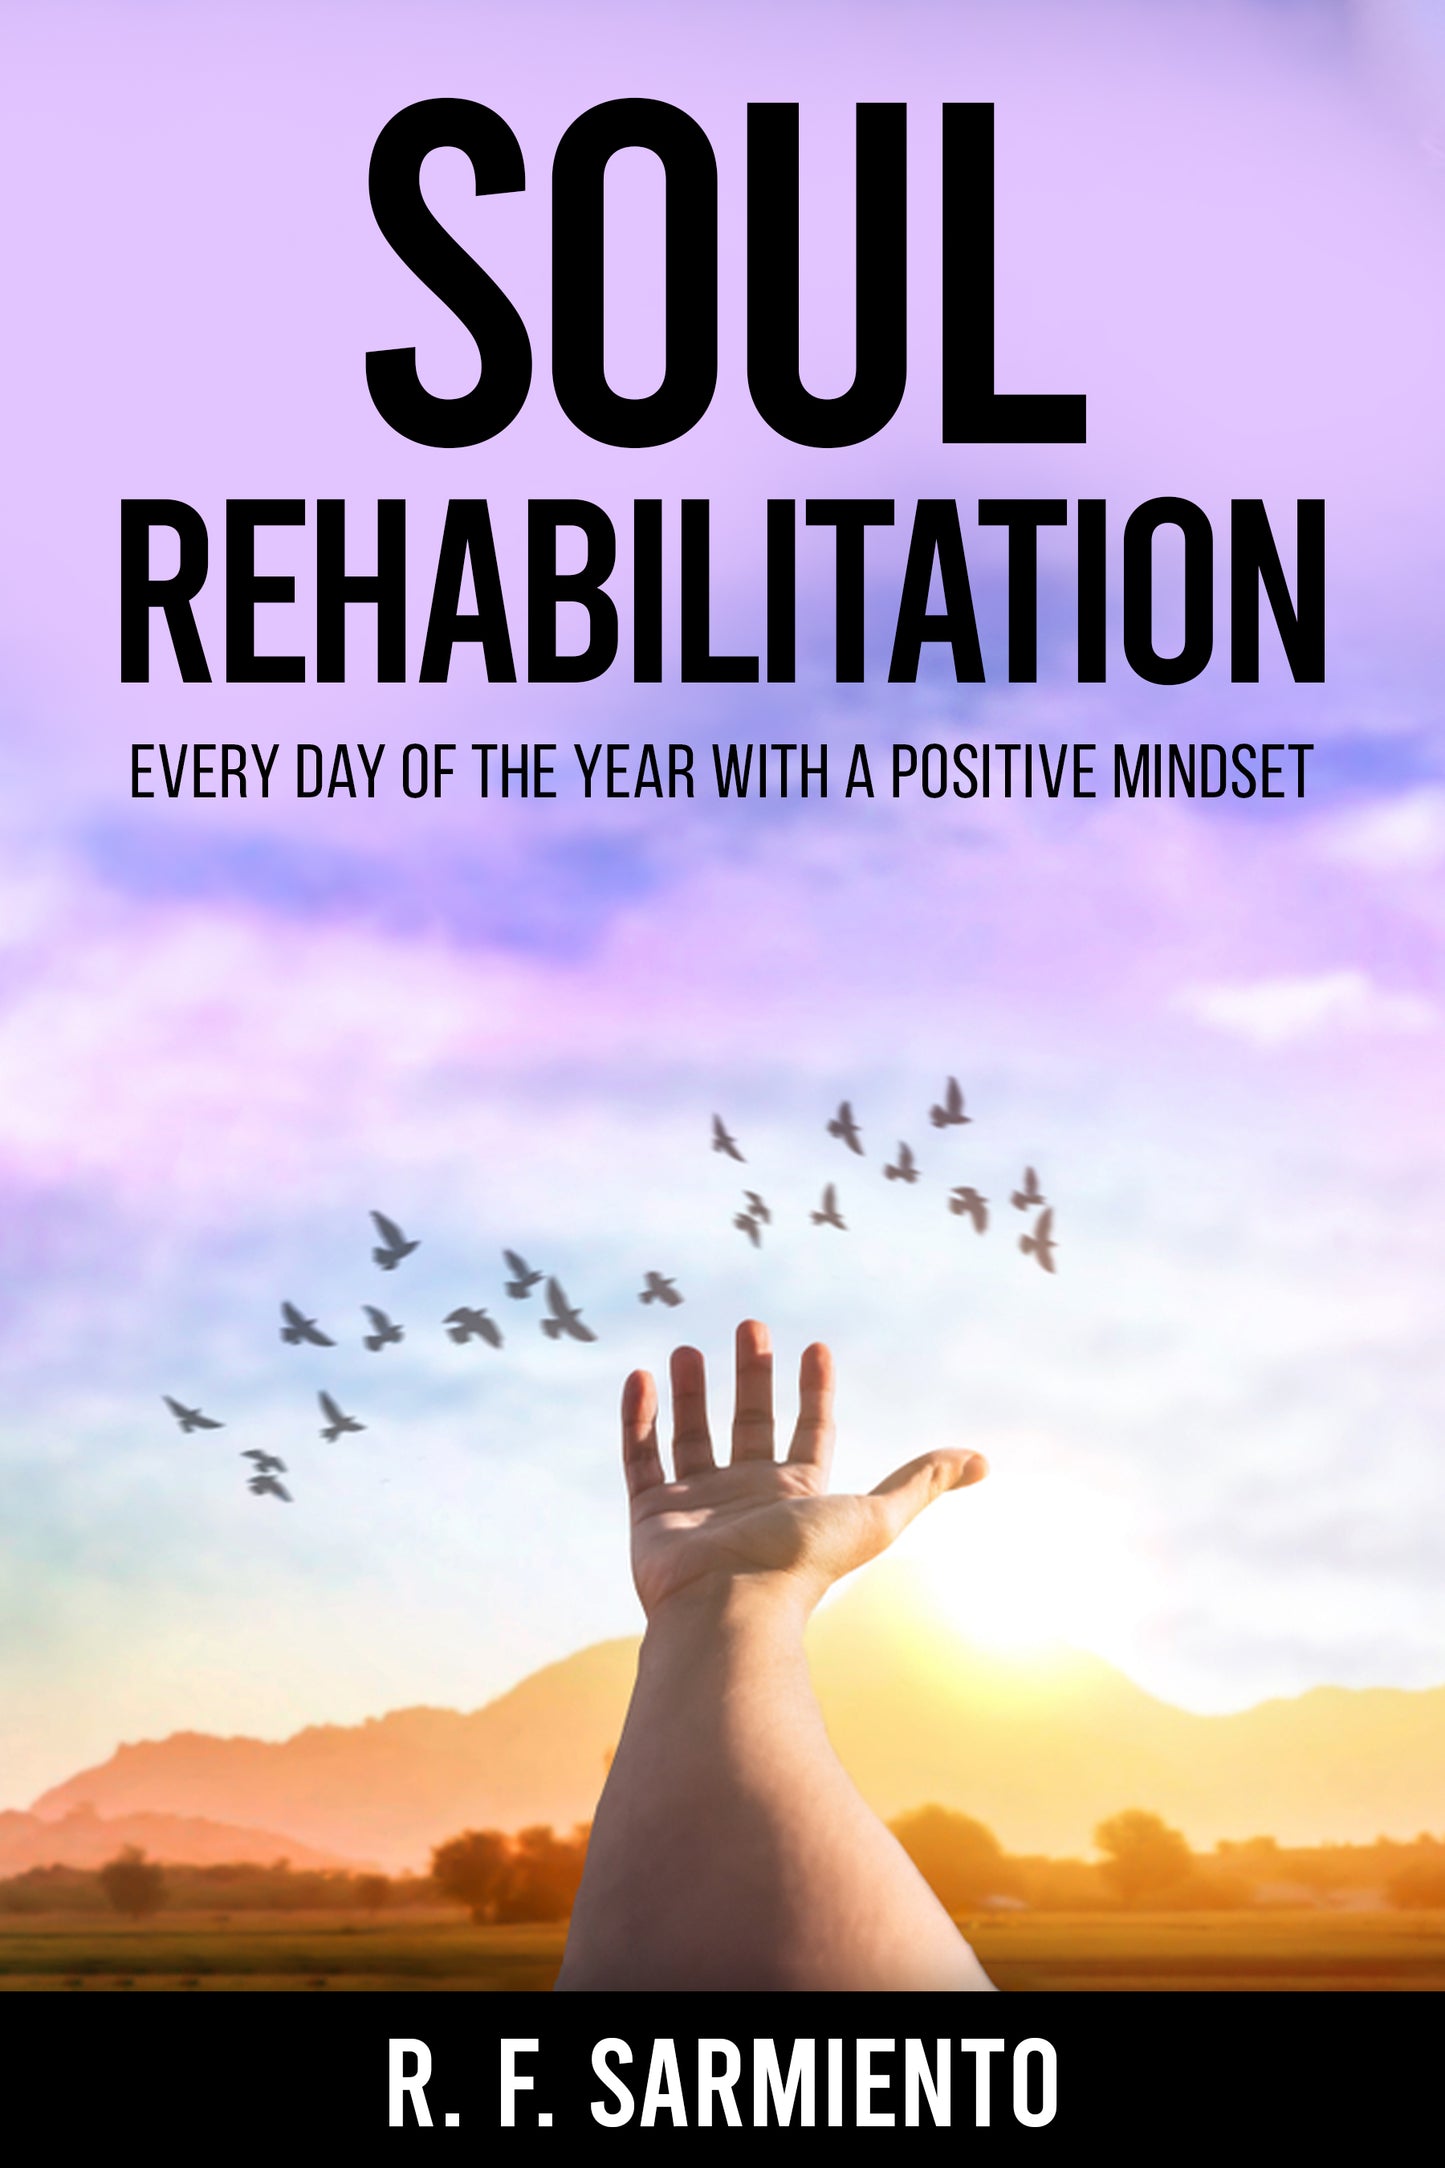 Soul Rehabilitation: Every day of the year with a positive mindset